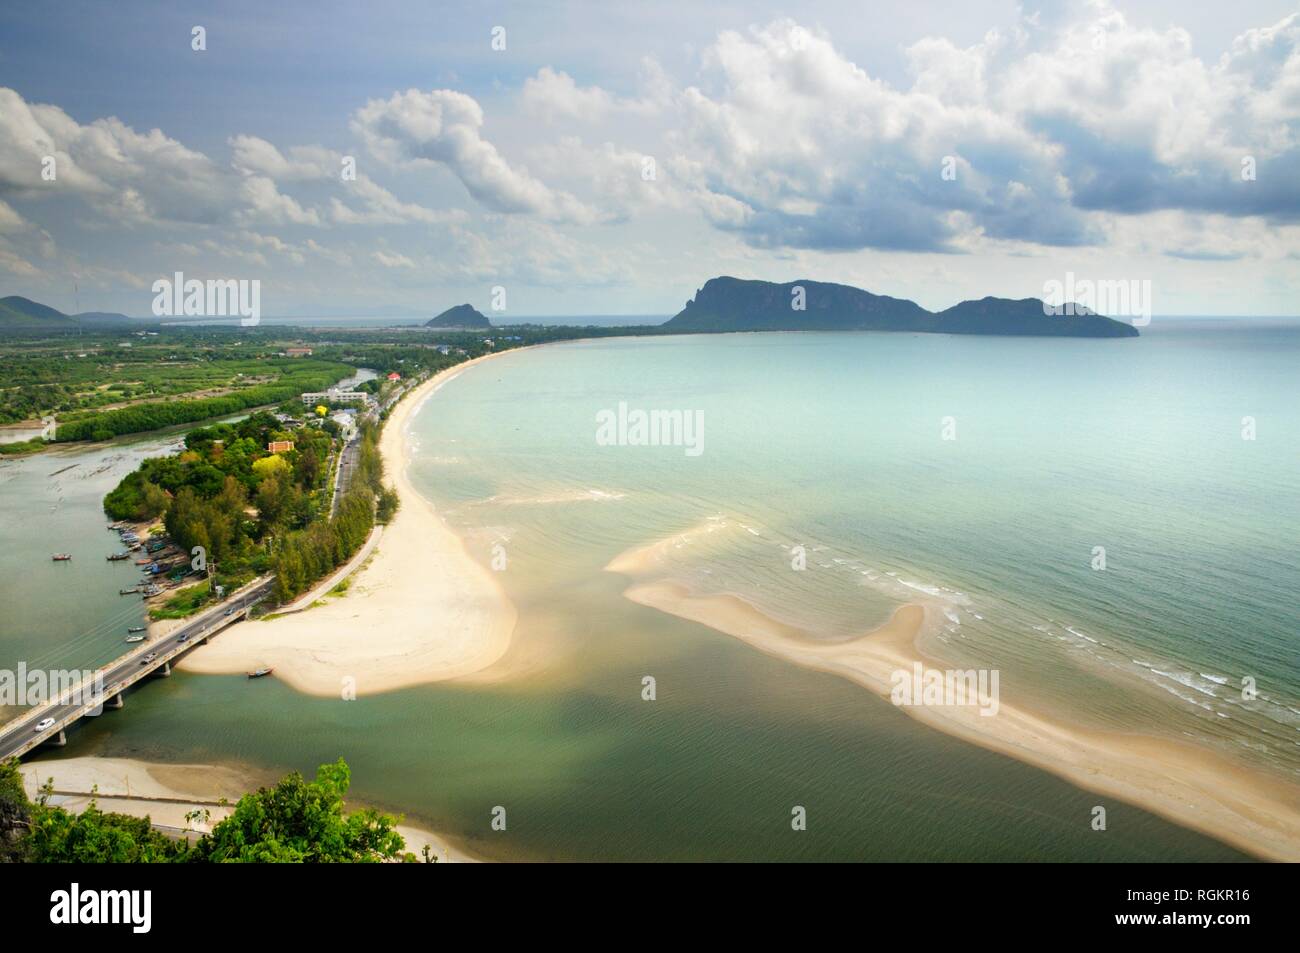 Aerial view of the Prachuap town seafront and Prachuap bay in Prachuap Khiri Khan province of Thailand Stock Photo